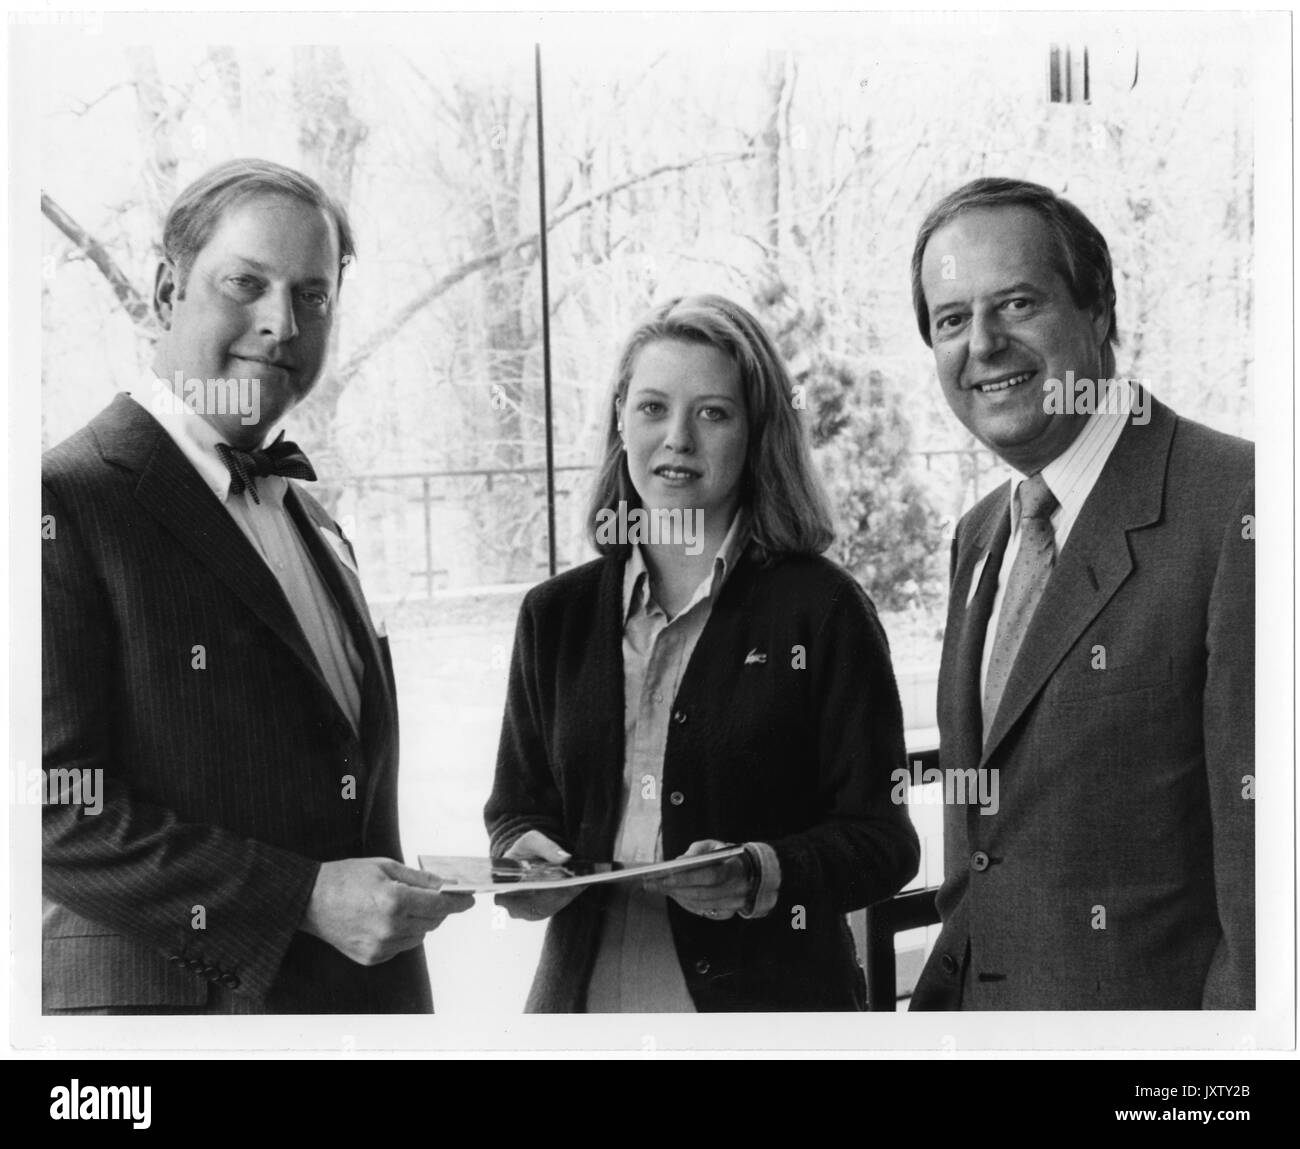 Beneficial-Hodson Merit Scholars, Steven Muller, Finn MW Casperson, An unidentified student is being presented in the Glass Pavilion with the Beneficial Hodson Merit Scholars Award by Finn MW Casperson, 1984. Stock Photo